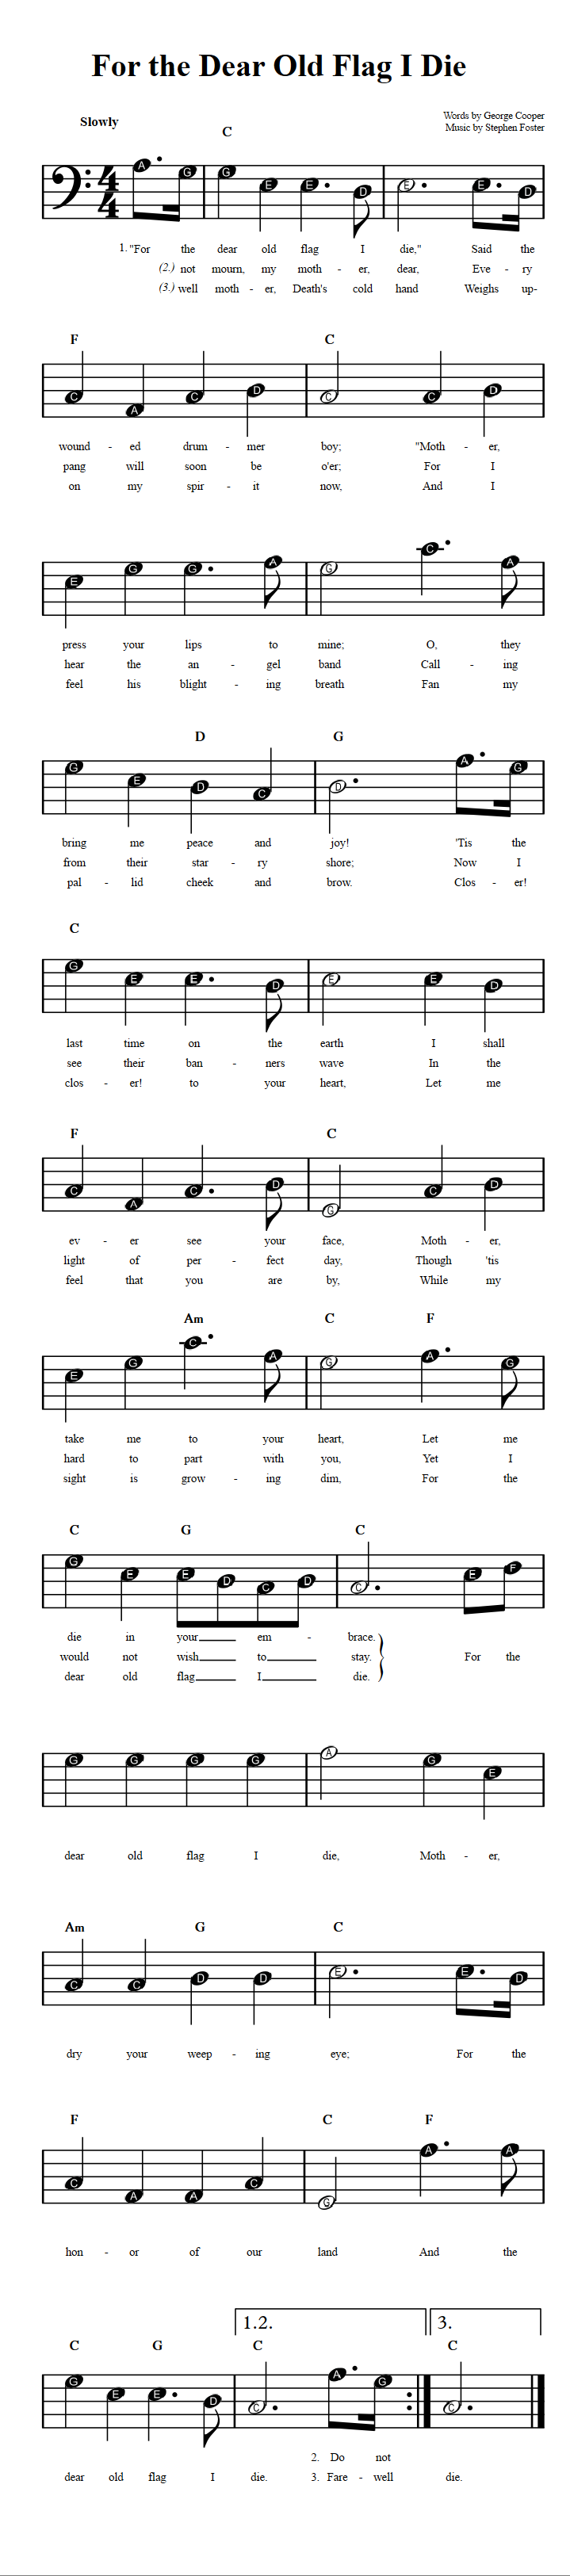 For the Dear Old Flag I Die  Beginner Bass Clef Sheet Music